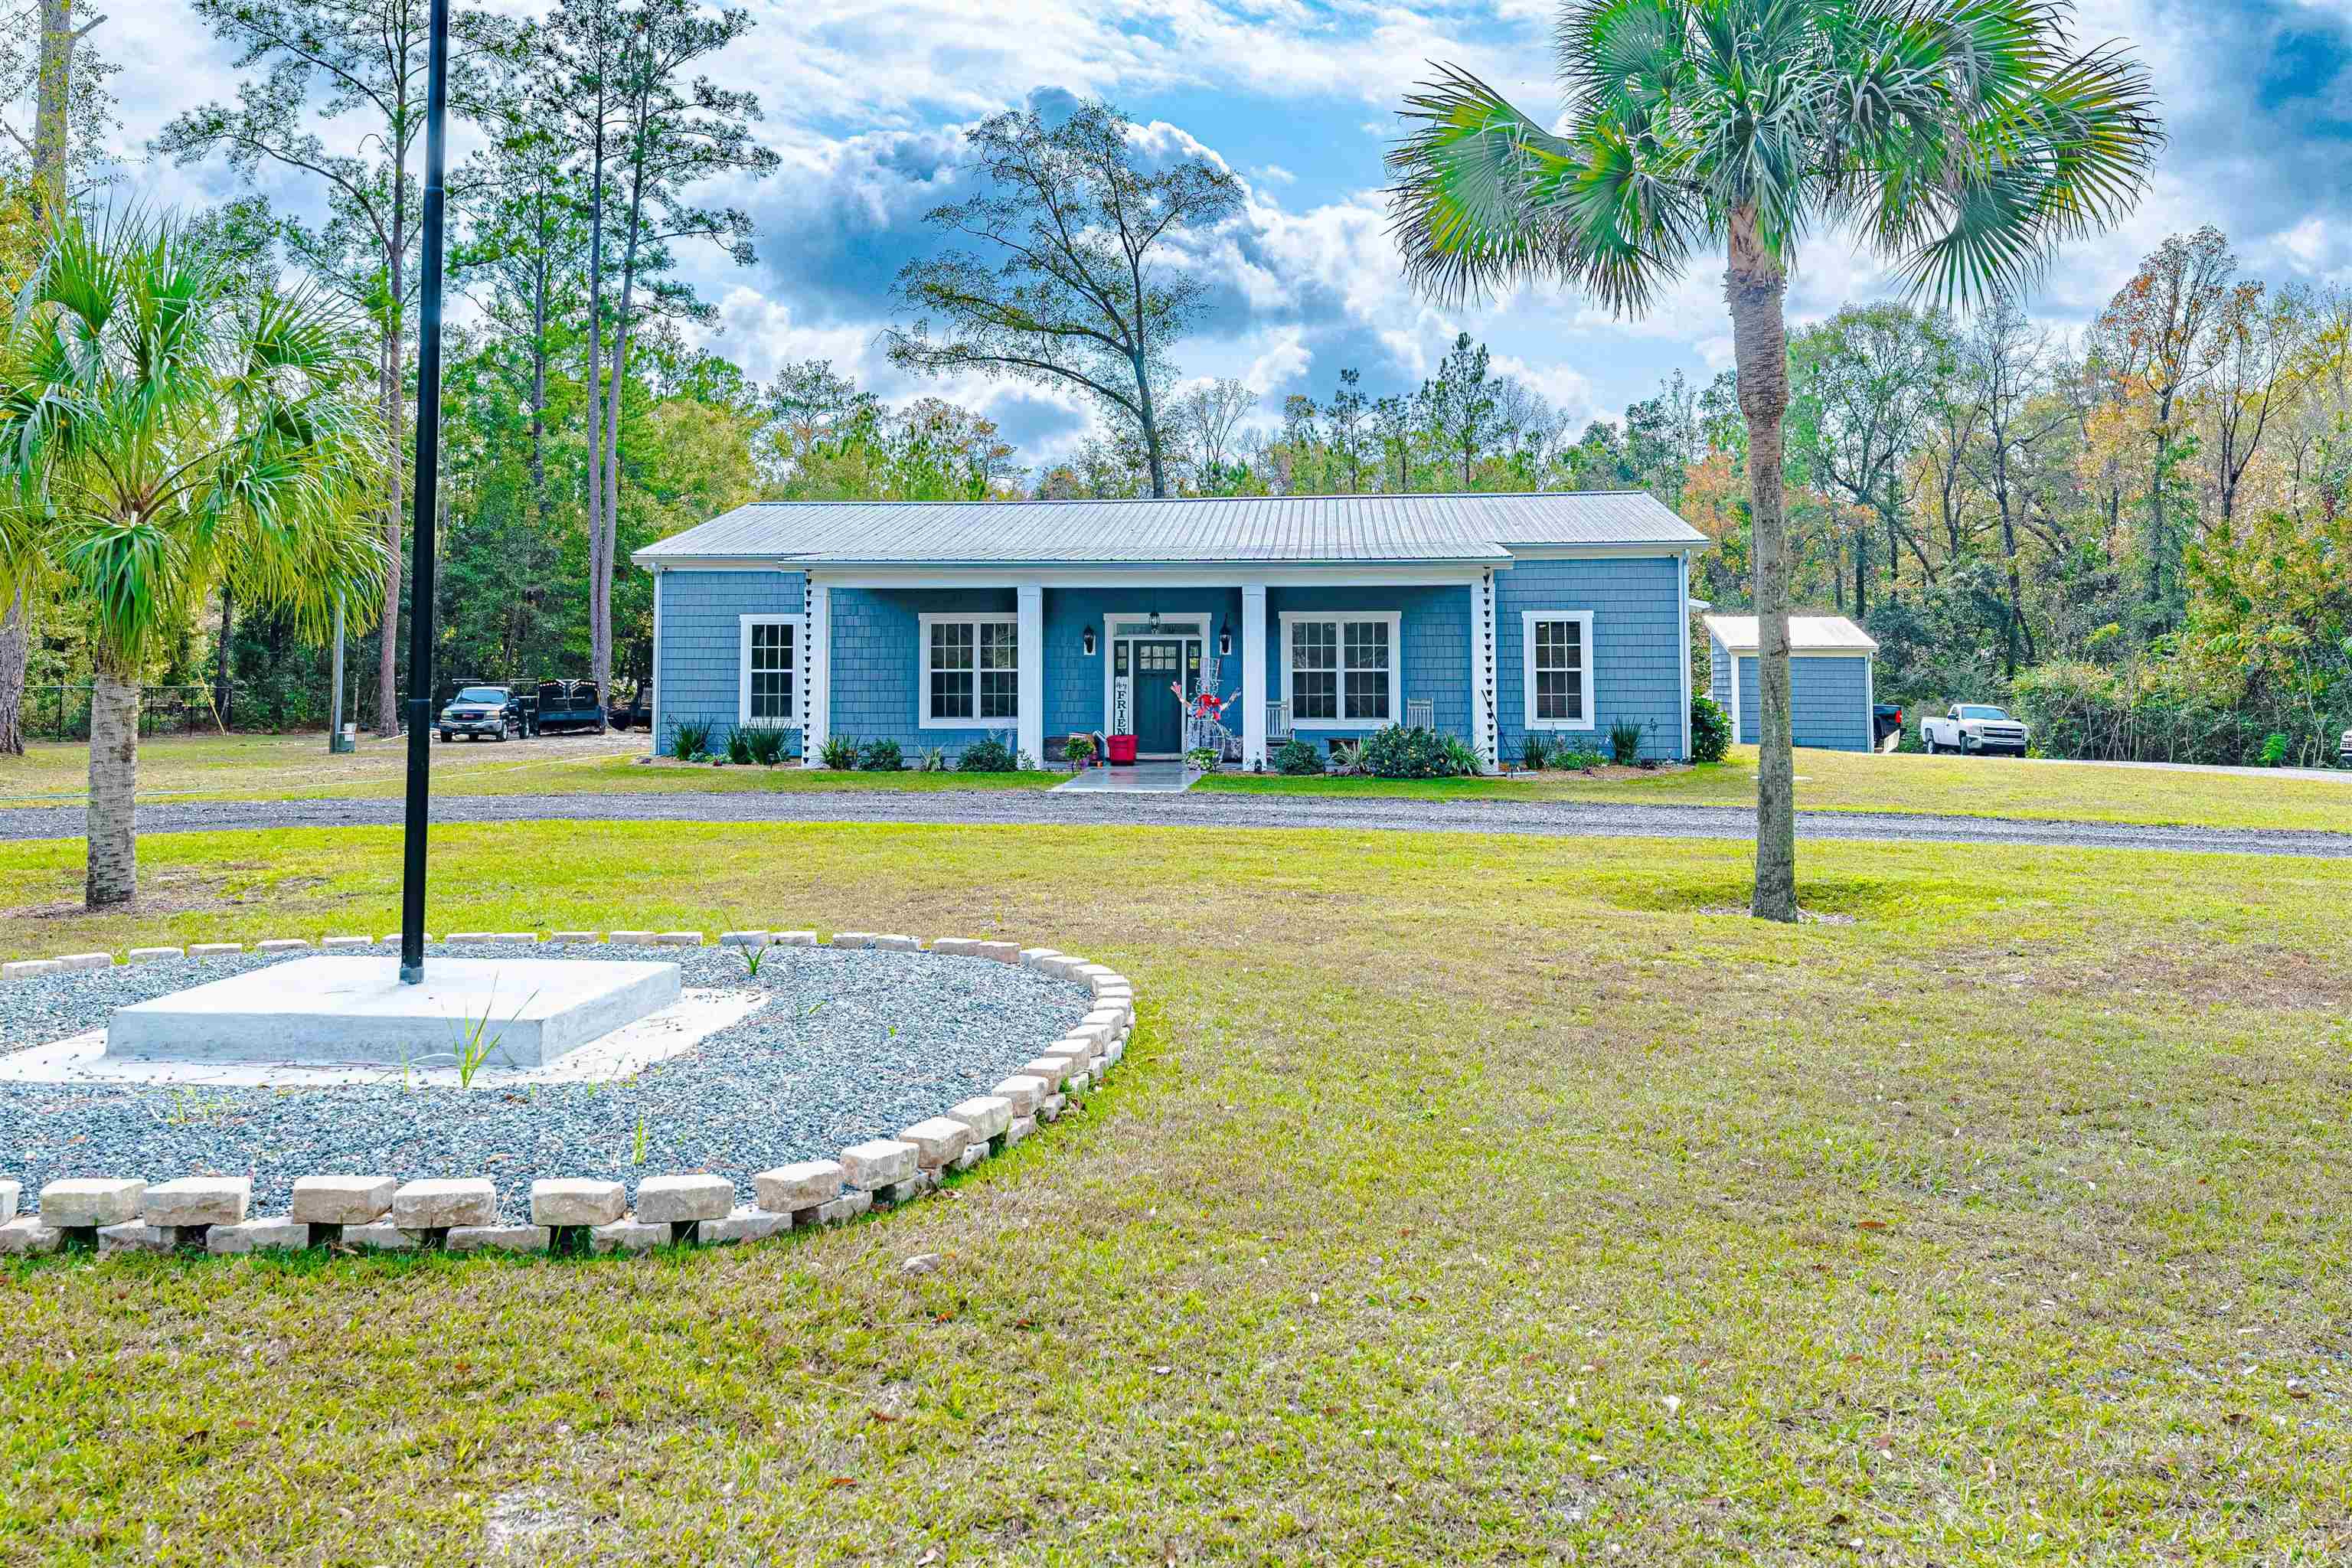 Check out this beauty in the Historical District of Gadsden County! This luxury home was built in 2021, comprised of custom features sure to peak the interest of many! From the over sized doors imported from Germany to the 1/2 inch Fiber Cement Cedar Shake Siding, from South America, wrapped around the house and 40x60 pole barn, this property is certainly one to be desired! This home features barn doors, luxury vinyl plank flooring, tankless water heater, premier gas appliances, 24 ft living area ceiling & 12ft exterior walls, 8 zone smart HVAC systems (2), granite countertops, custom pass-thru window in the kitchen, beautiful 40 inch premier copper stove vent, and so much more. Go outside and enjoy either the front or back patio with it's graphic decorative overlay cement flooring, already equipped with TV for entertaining or just relaxing.  This home is a year old and highly maintained.  It's energy efficient and handicap accessible as well.  It is also protected with greater than 6 inches of foam insulation and is safe to stand up to extreme weather conditions, including high winds and fires due to the imported Shake Siding. If you are looking for a small town feel and a premier home, this one is a MUST SEE! This house has so much more than can be described, you have to just see it for yourself, it's truly  extraordinary!